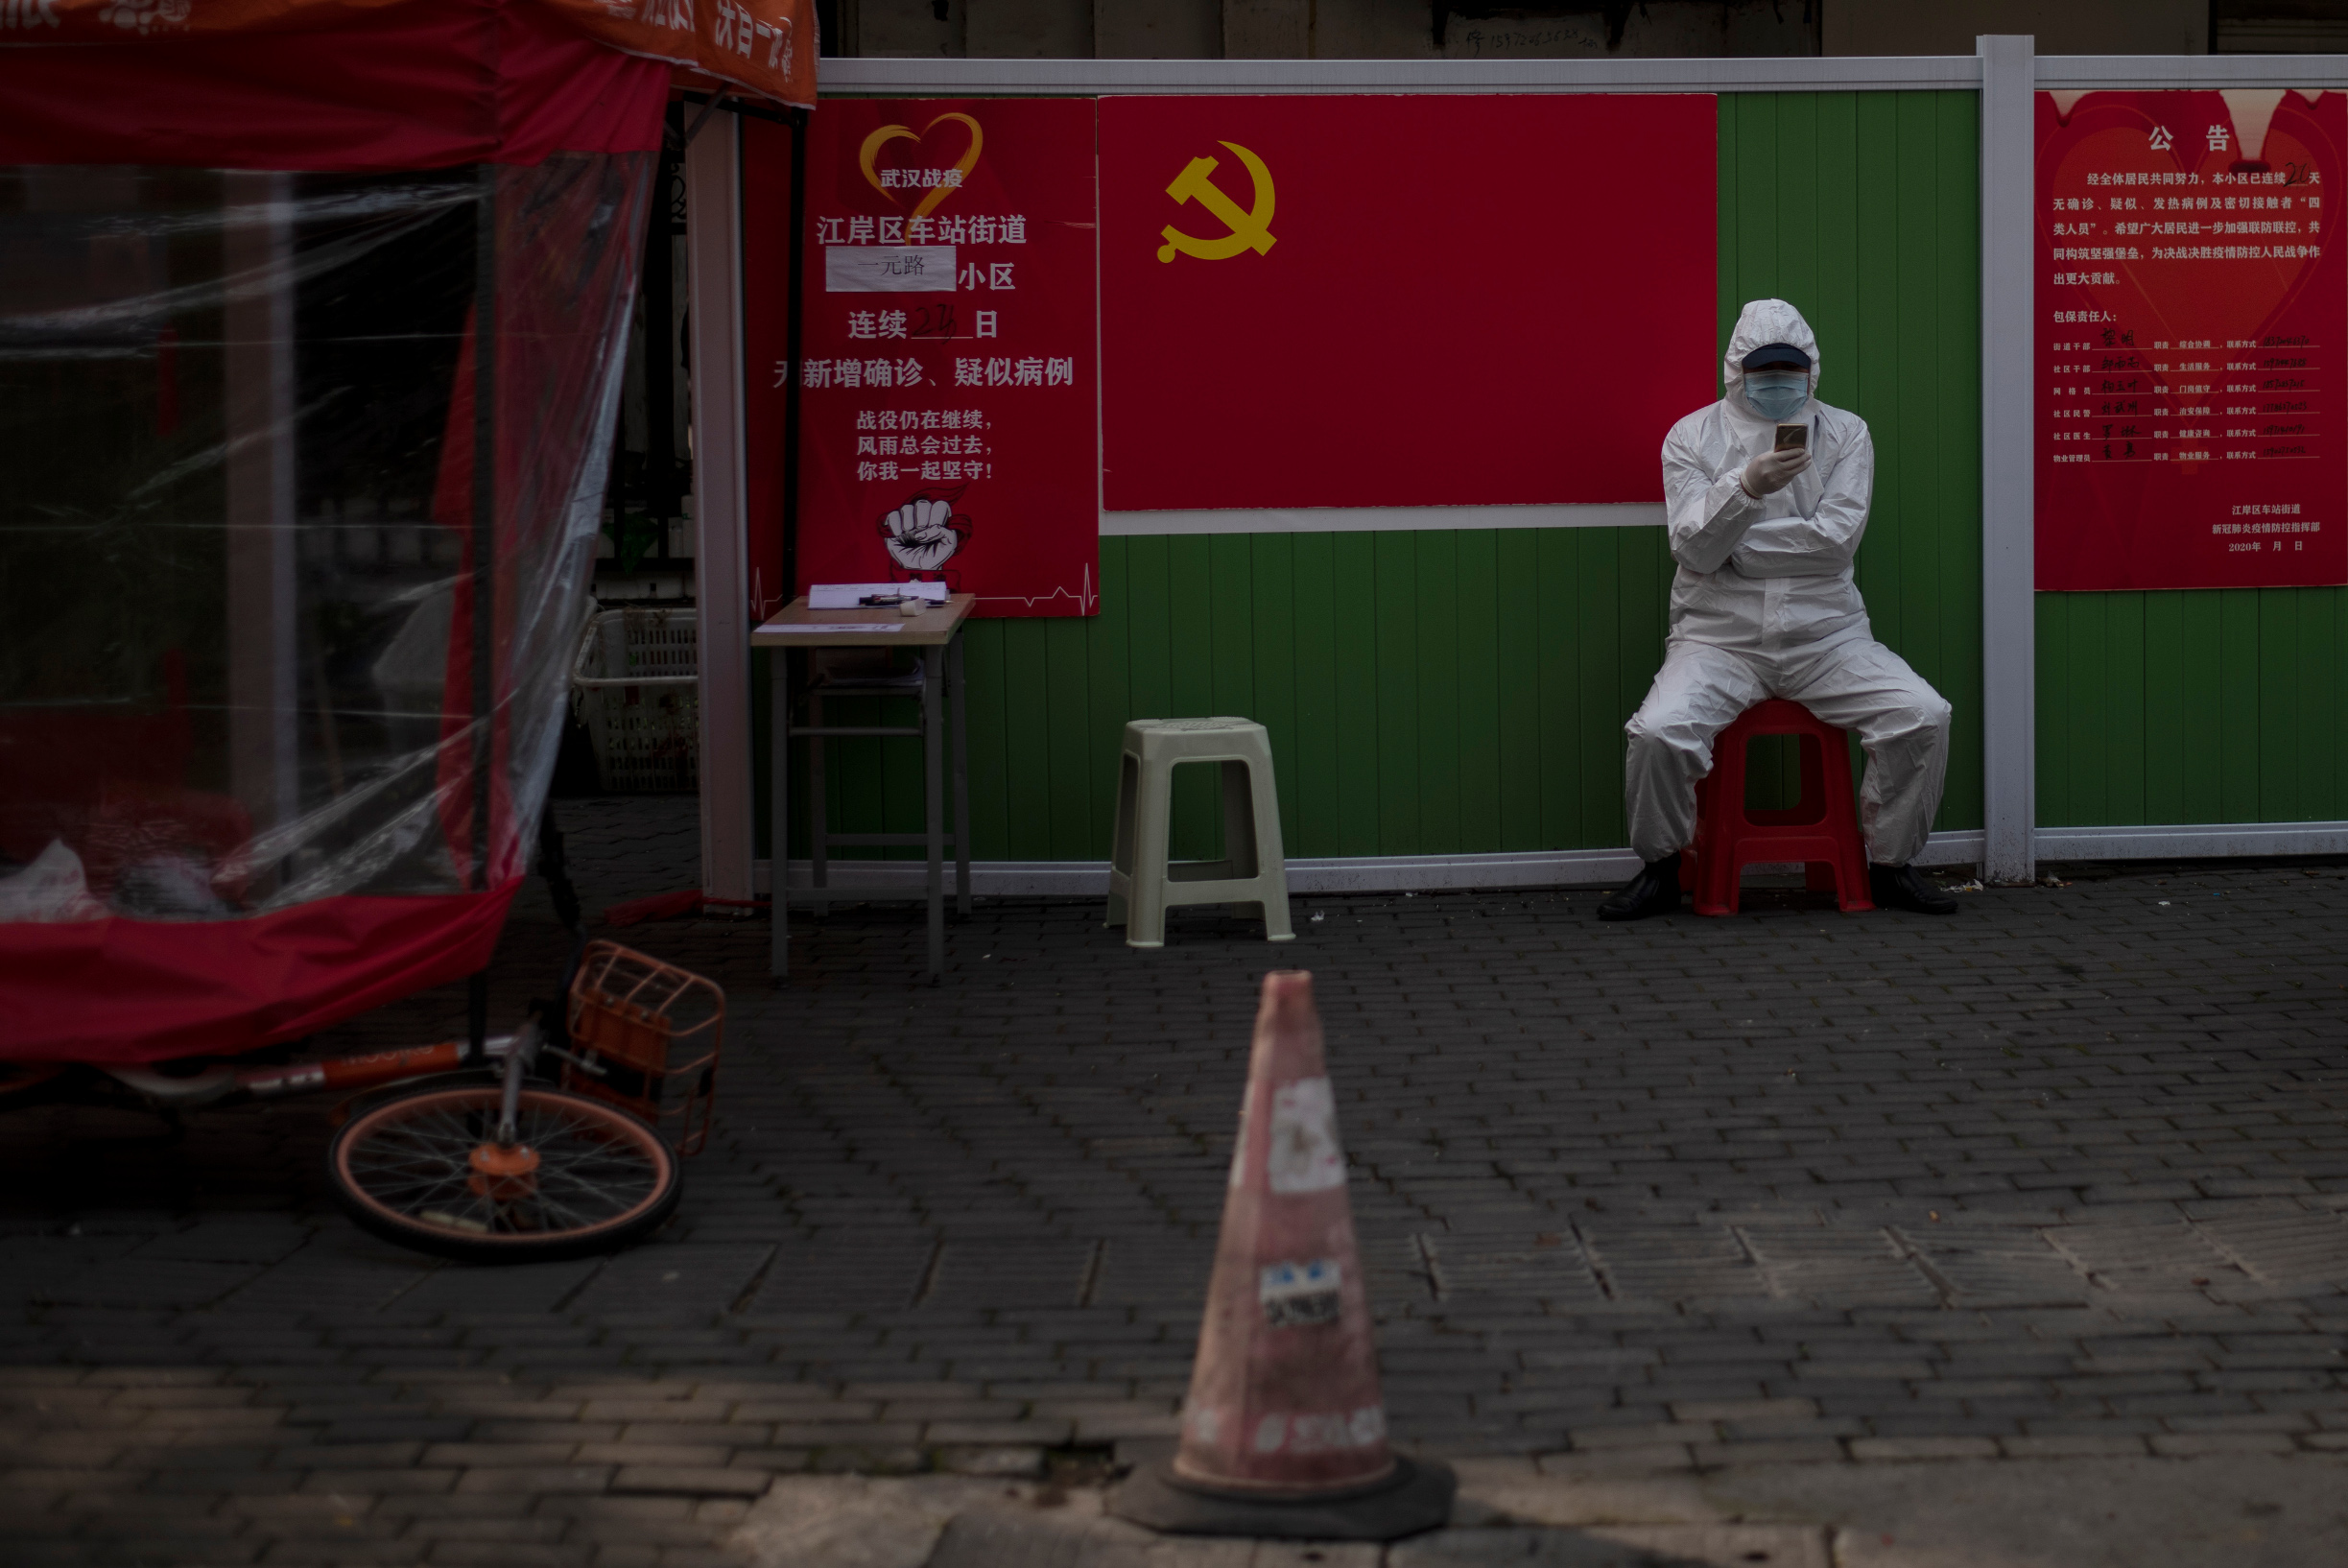 A community volunteer wearing a hazmat suit guards the entrance of a compound along in Wuhan, in China's central Hubei province on April 1, 2020. (Photo by NOEL CELIS / AFP)